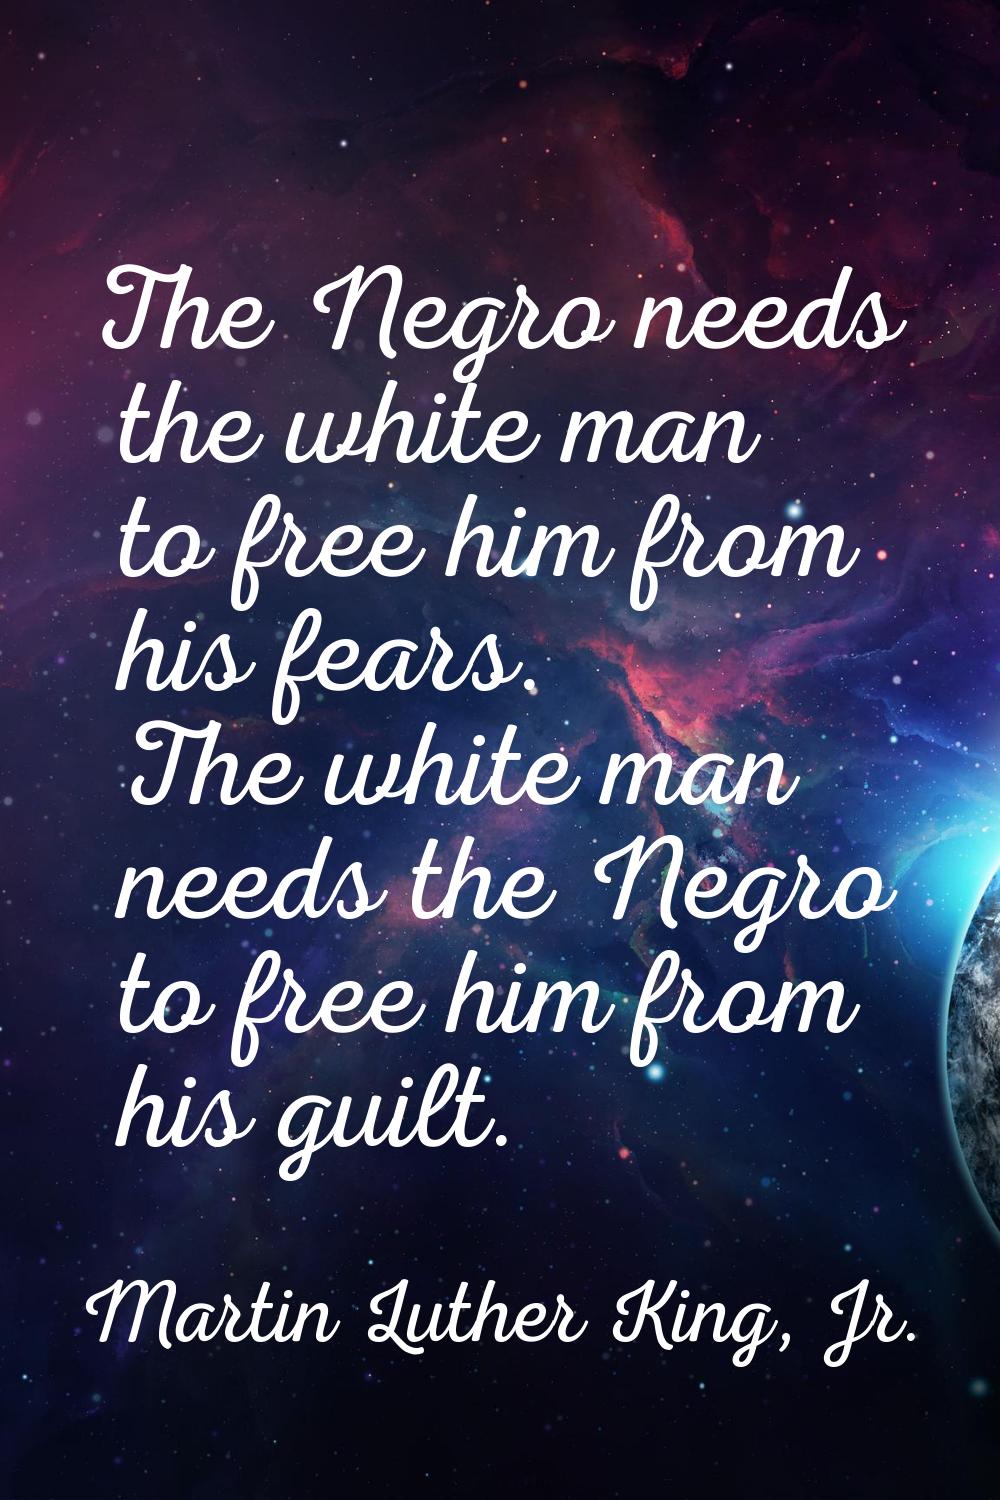 The Negro needs the white man to free him from his fears. The white man needs the Negro to free him